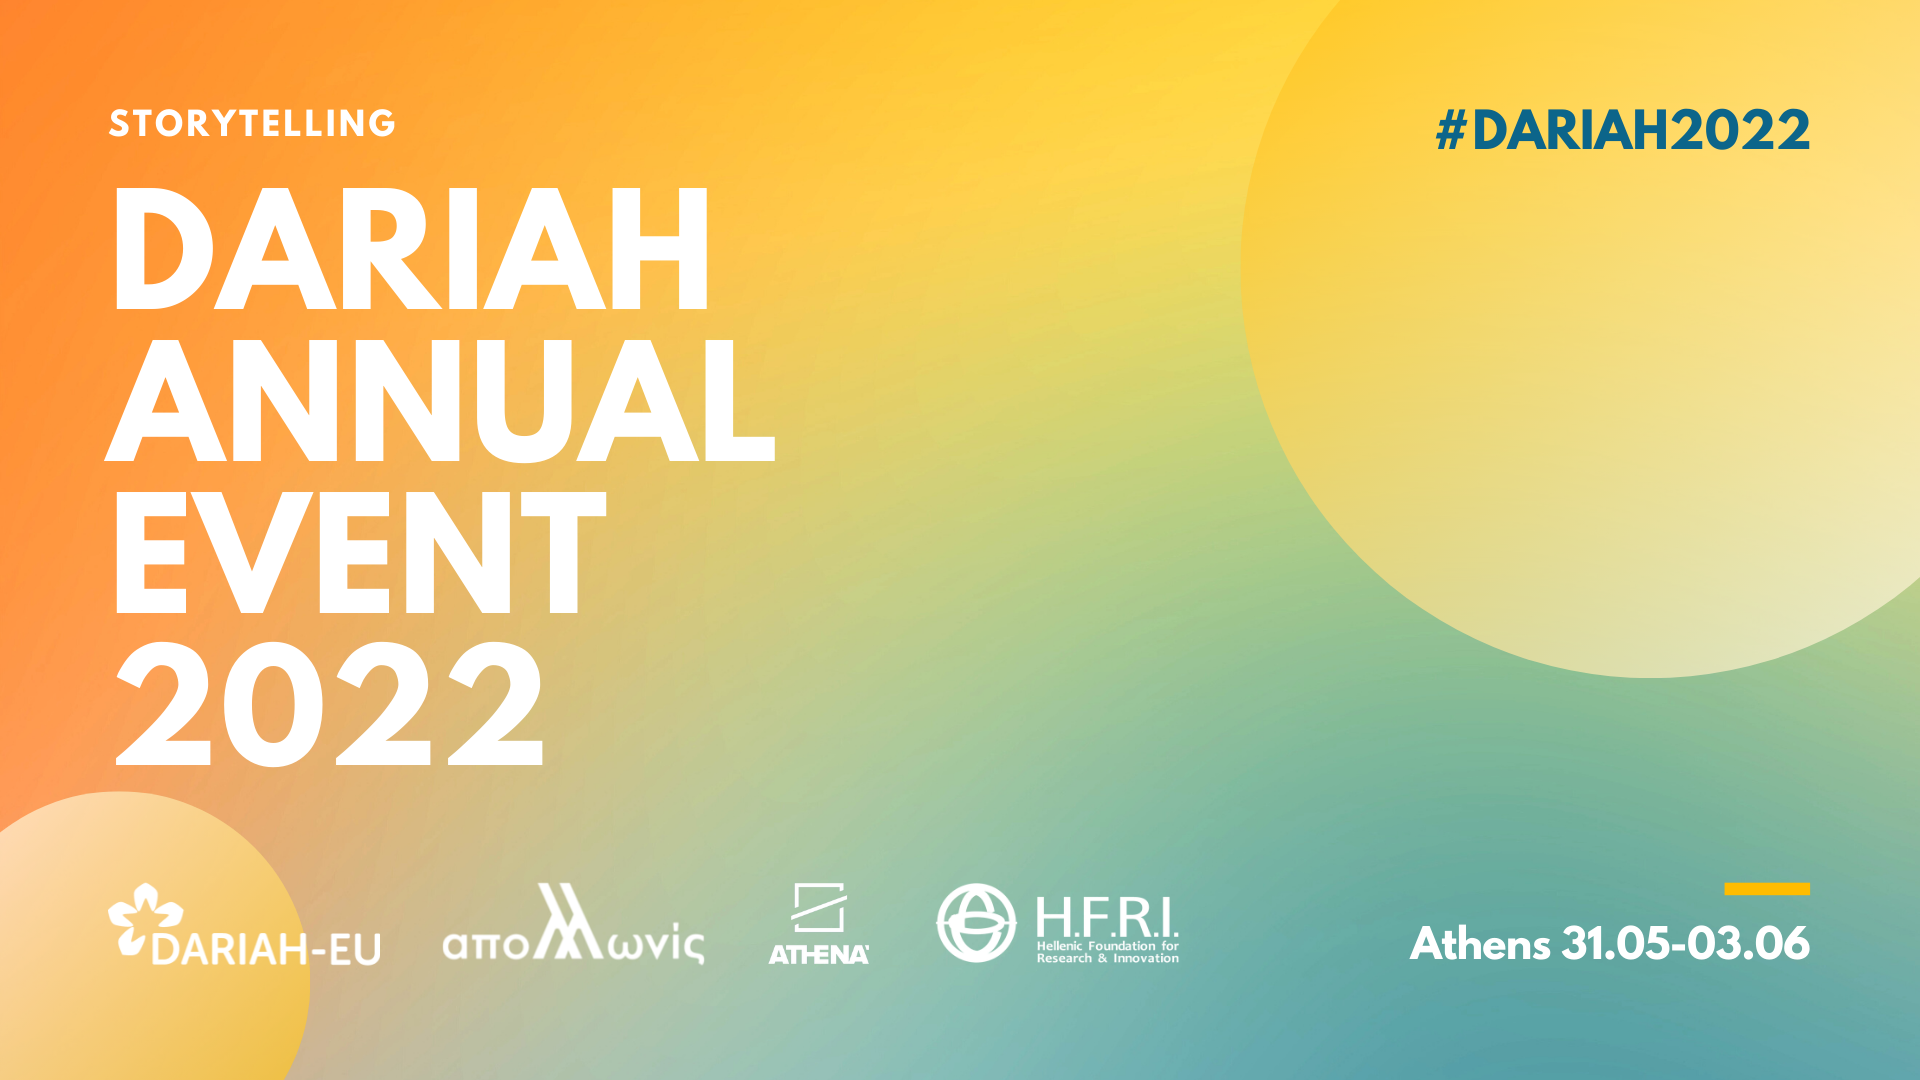 DARIAH Annual Event 2022 comes to Athens!